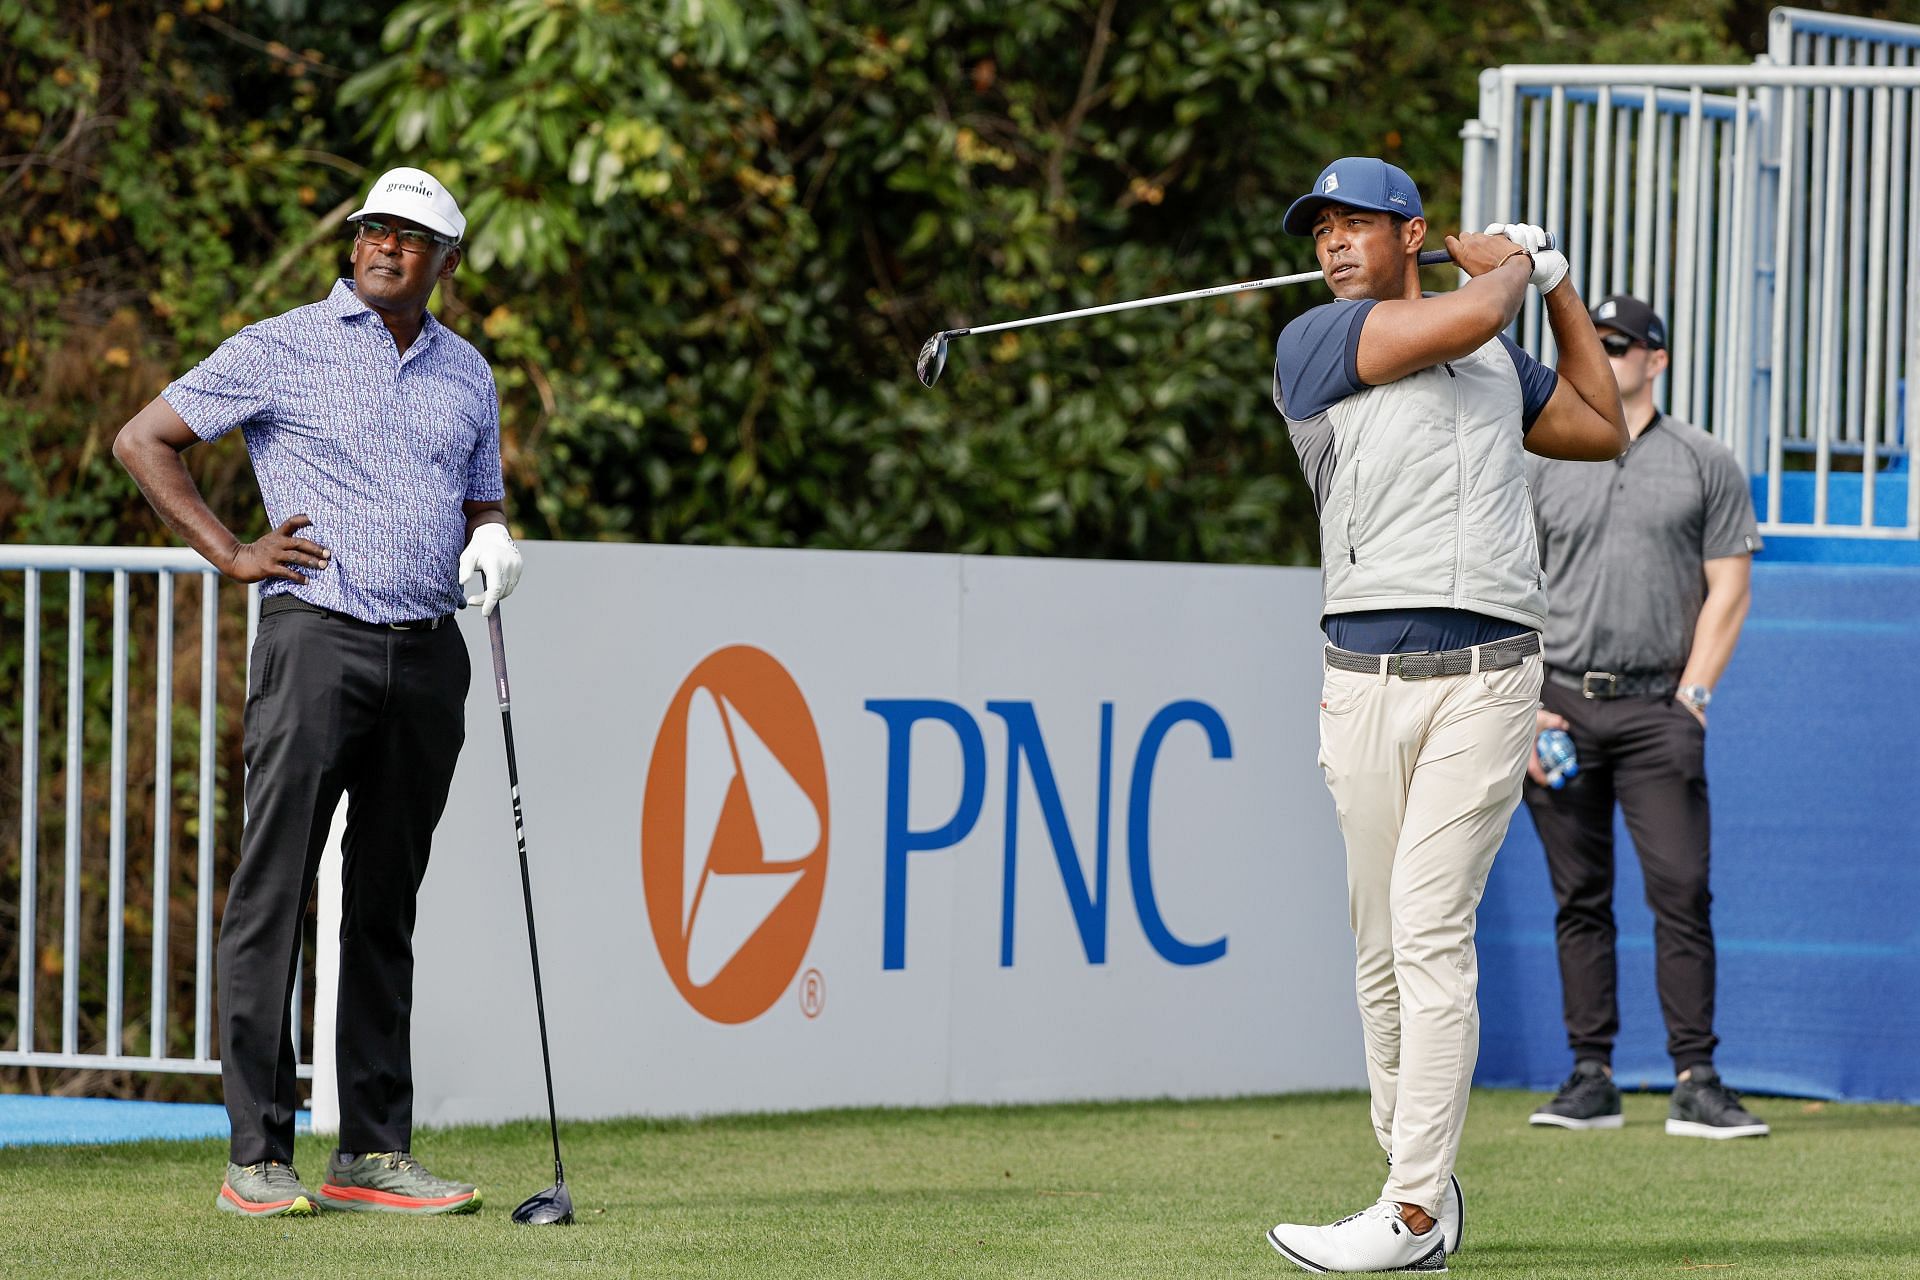 2023 PNC Championship Friday tee times and pairings explored